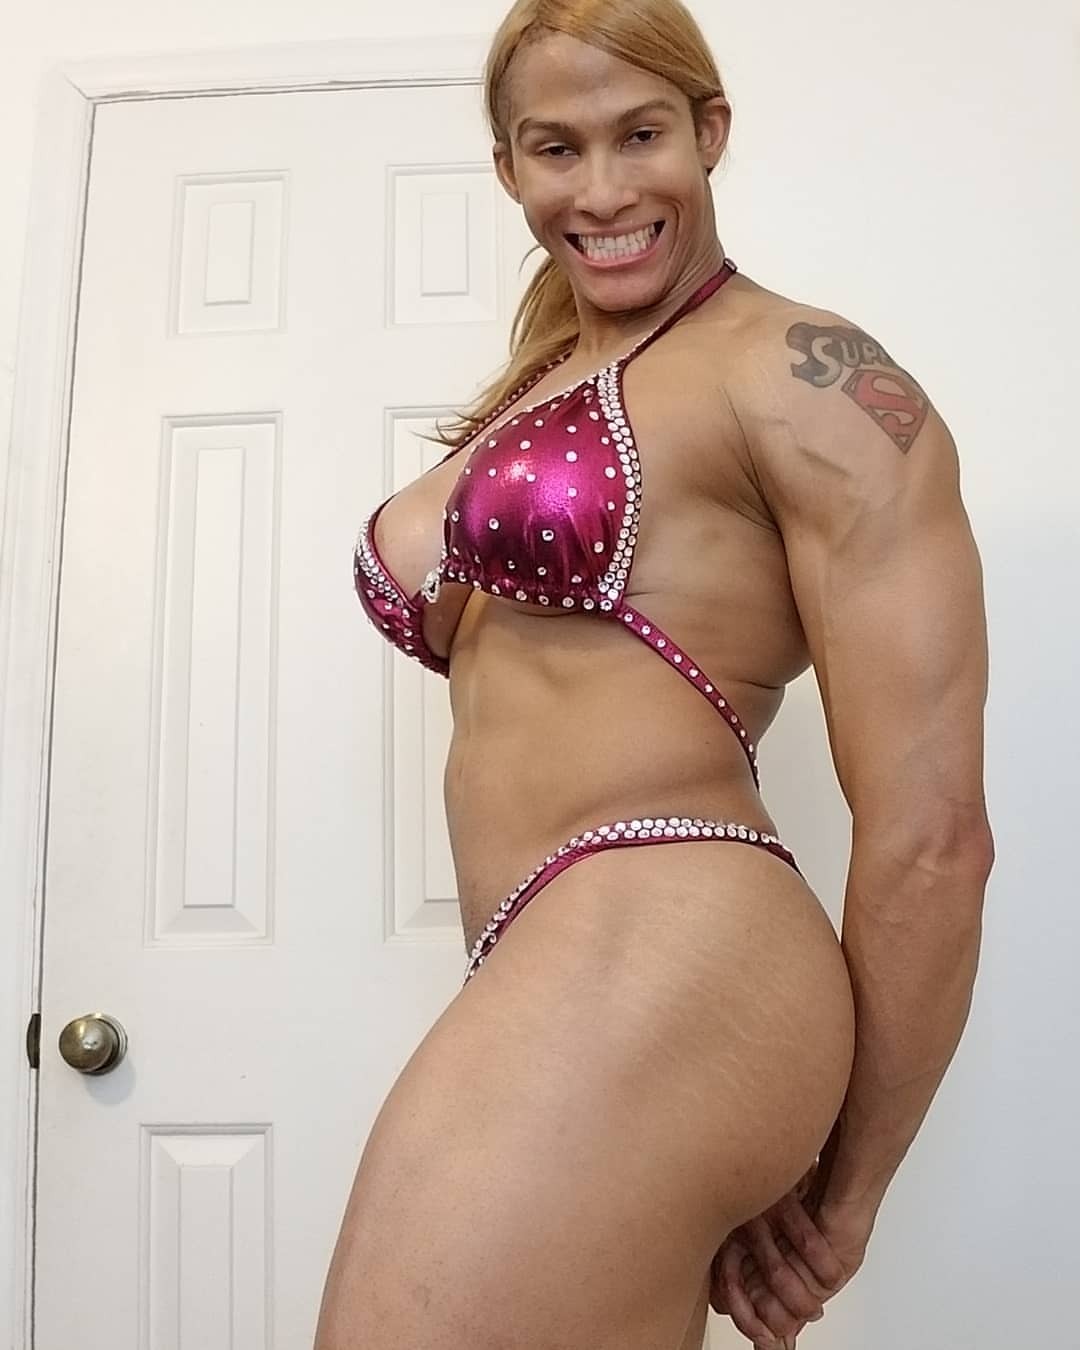 Muscle Shemale - Muscular Shemale Cum Most Beautiful | Anal Dream House